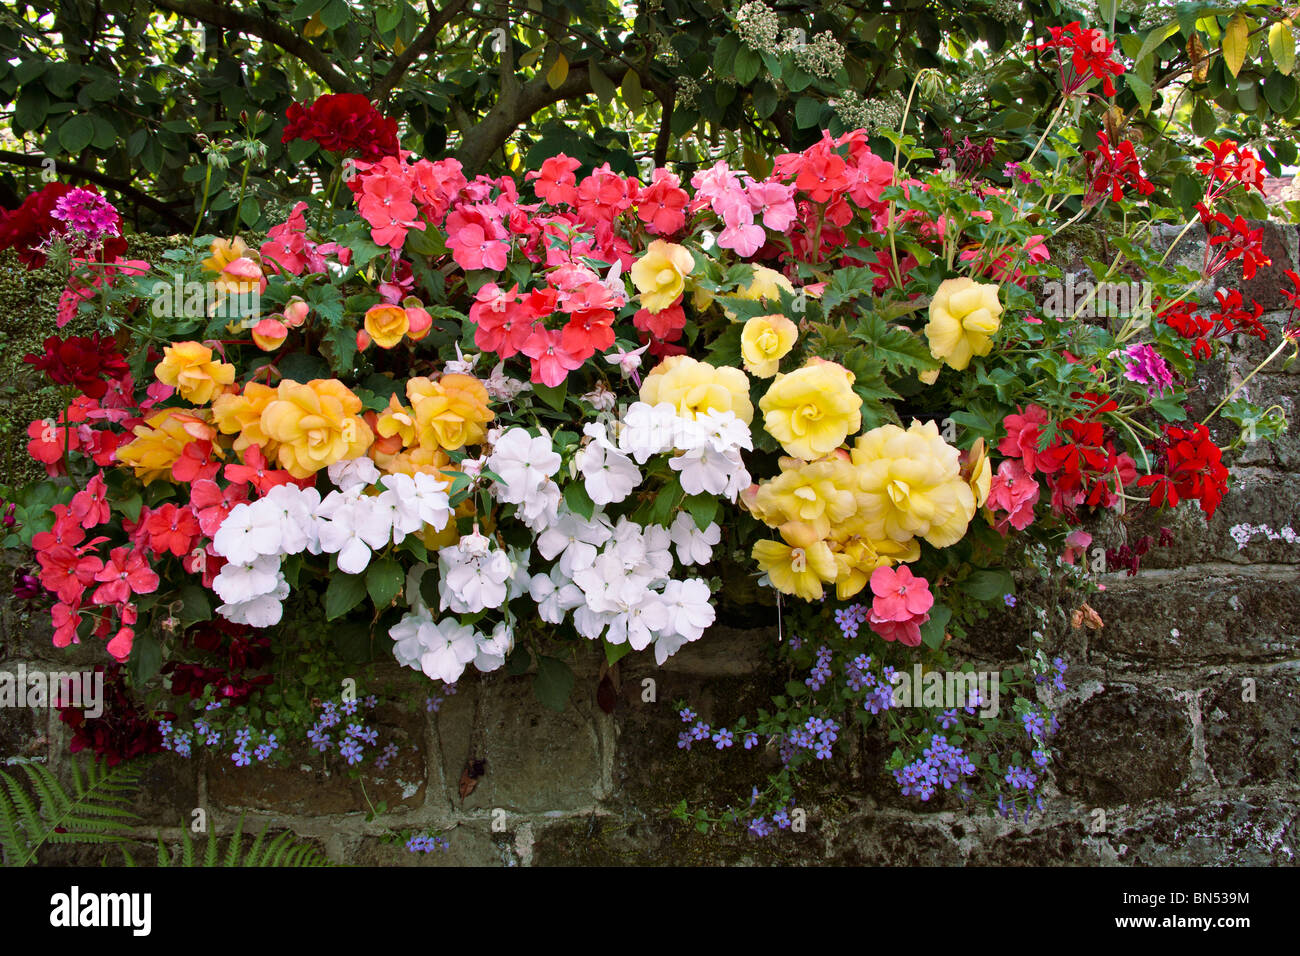 A colourful Summer wall planter filled with Busy Lizzies (Impatiens walleriana), Begonias and Pelargoniums in British garden Stock Photo